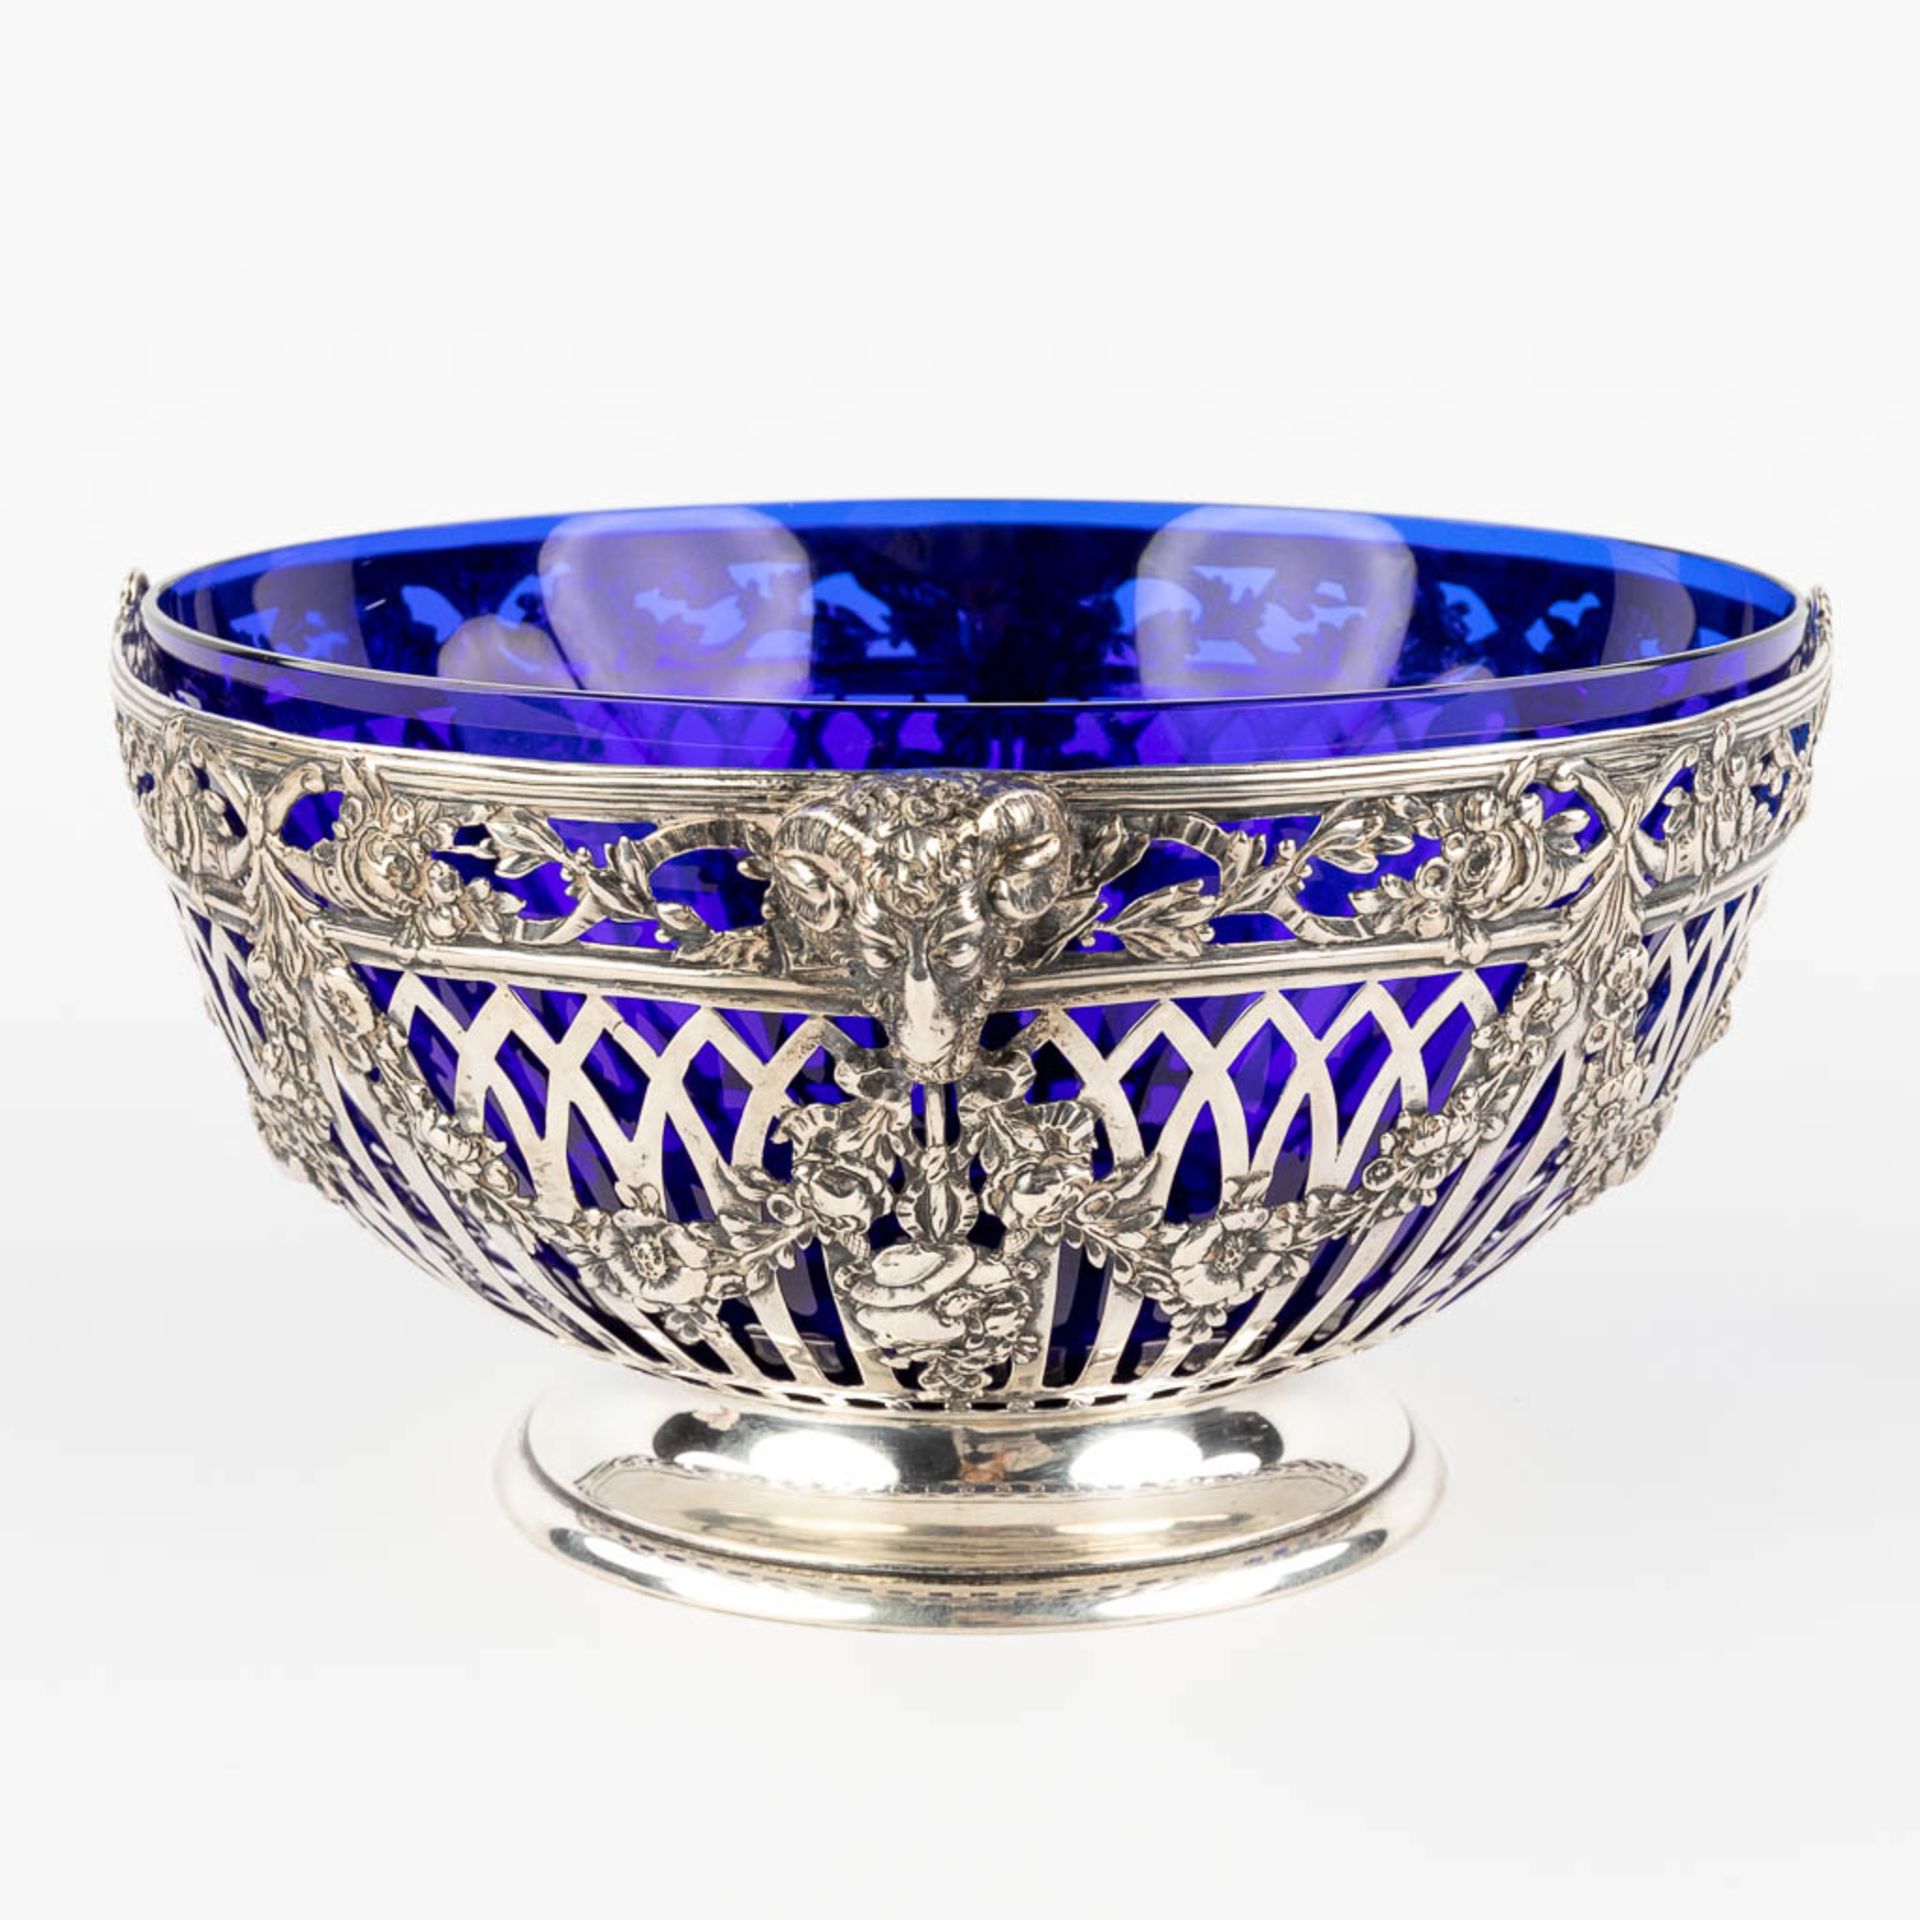 A bowl, silver and blue glass, decor of ram's heads and garlands. Germany. 684g. (D:25 x W:27 x H:13 - Image 4 of 14